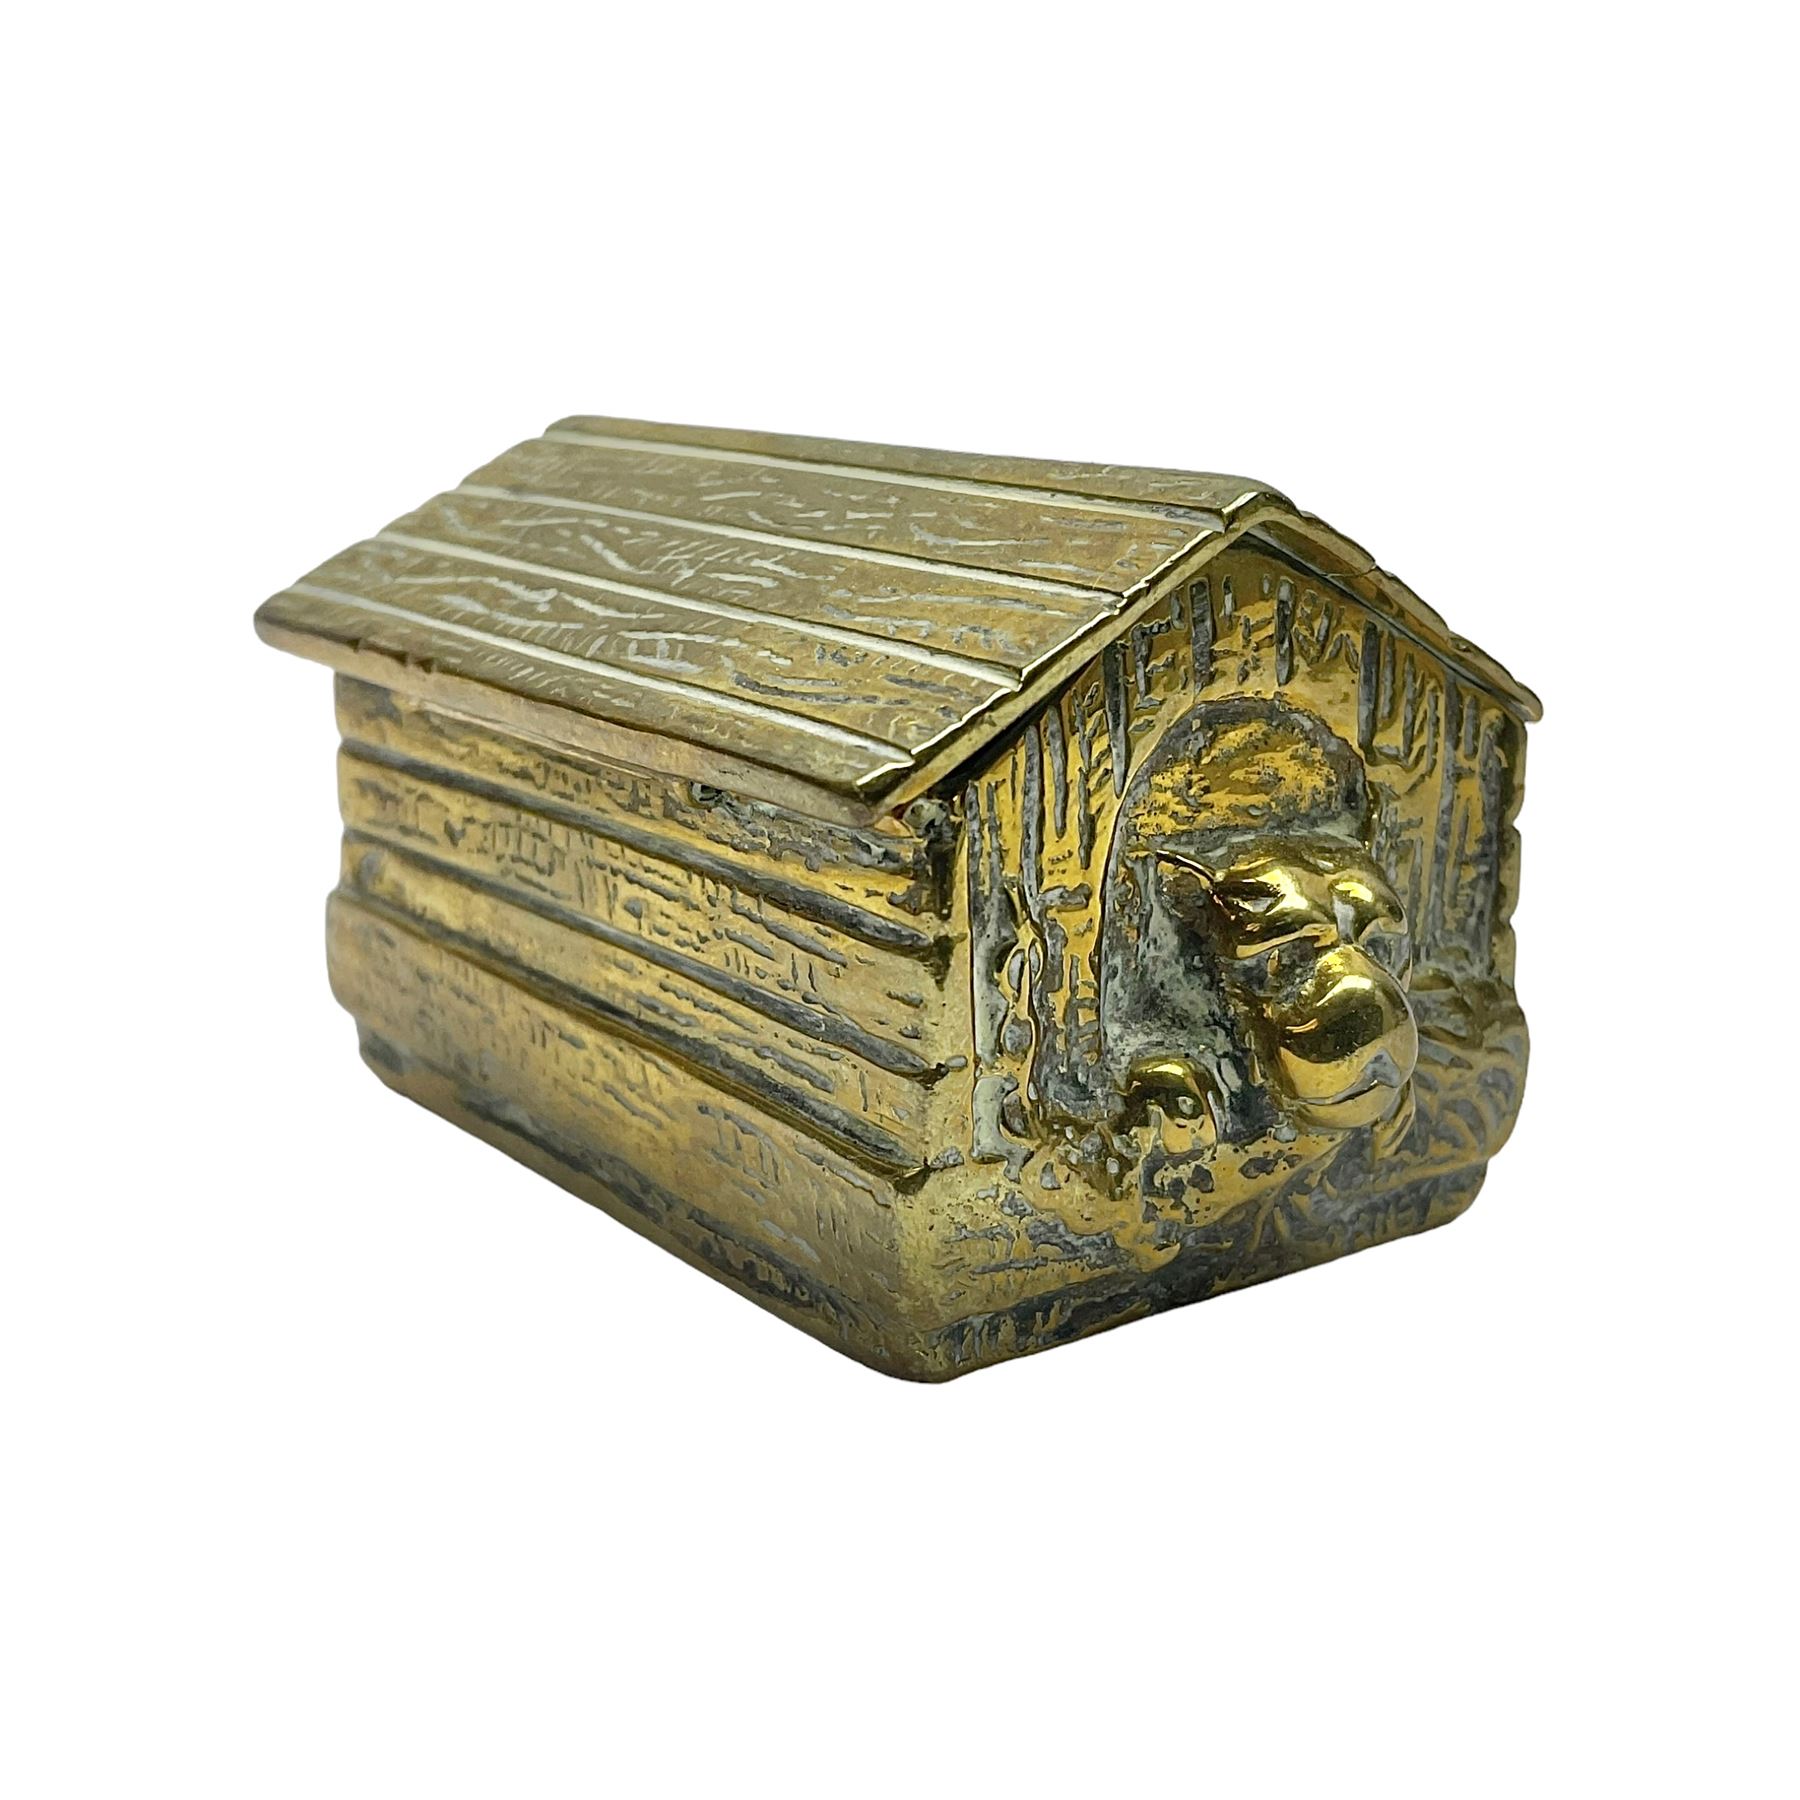 Brass vesta case in the form of a dog kennel